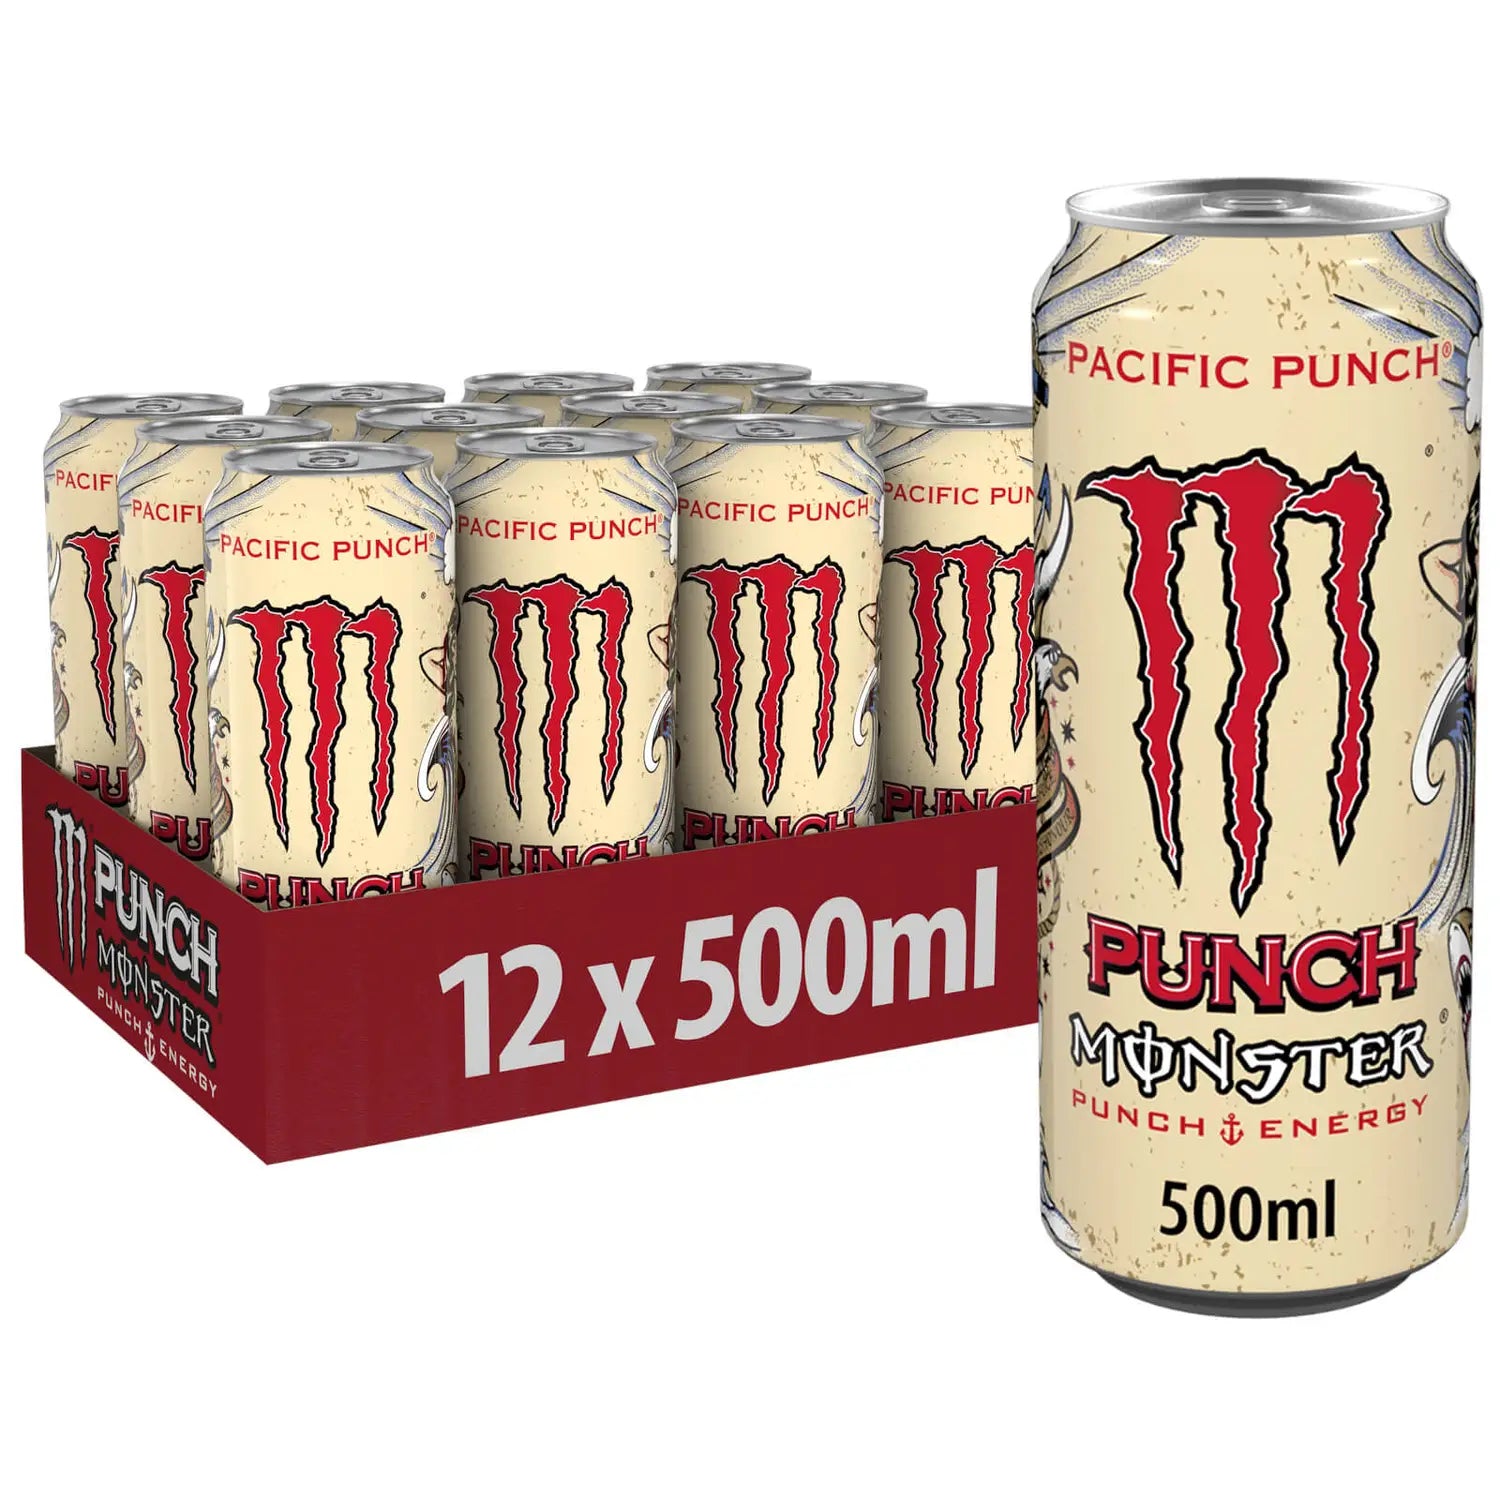 Monster Energy Drink Pacific Punch 12x500ml (Shipping Restricted)